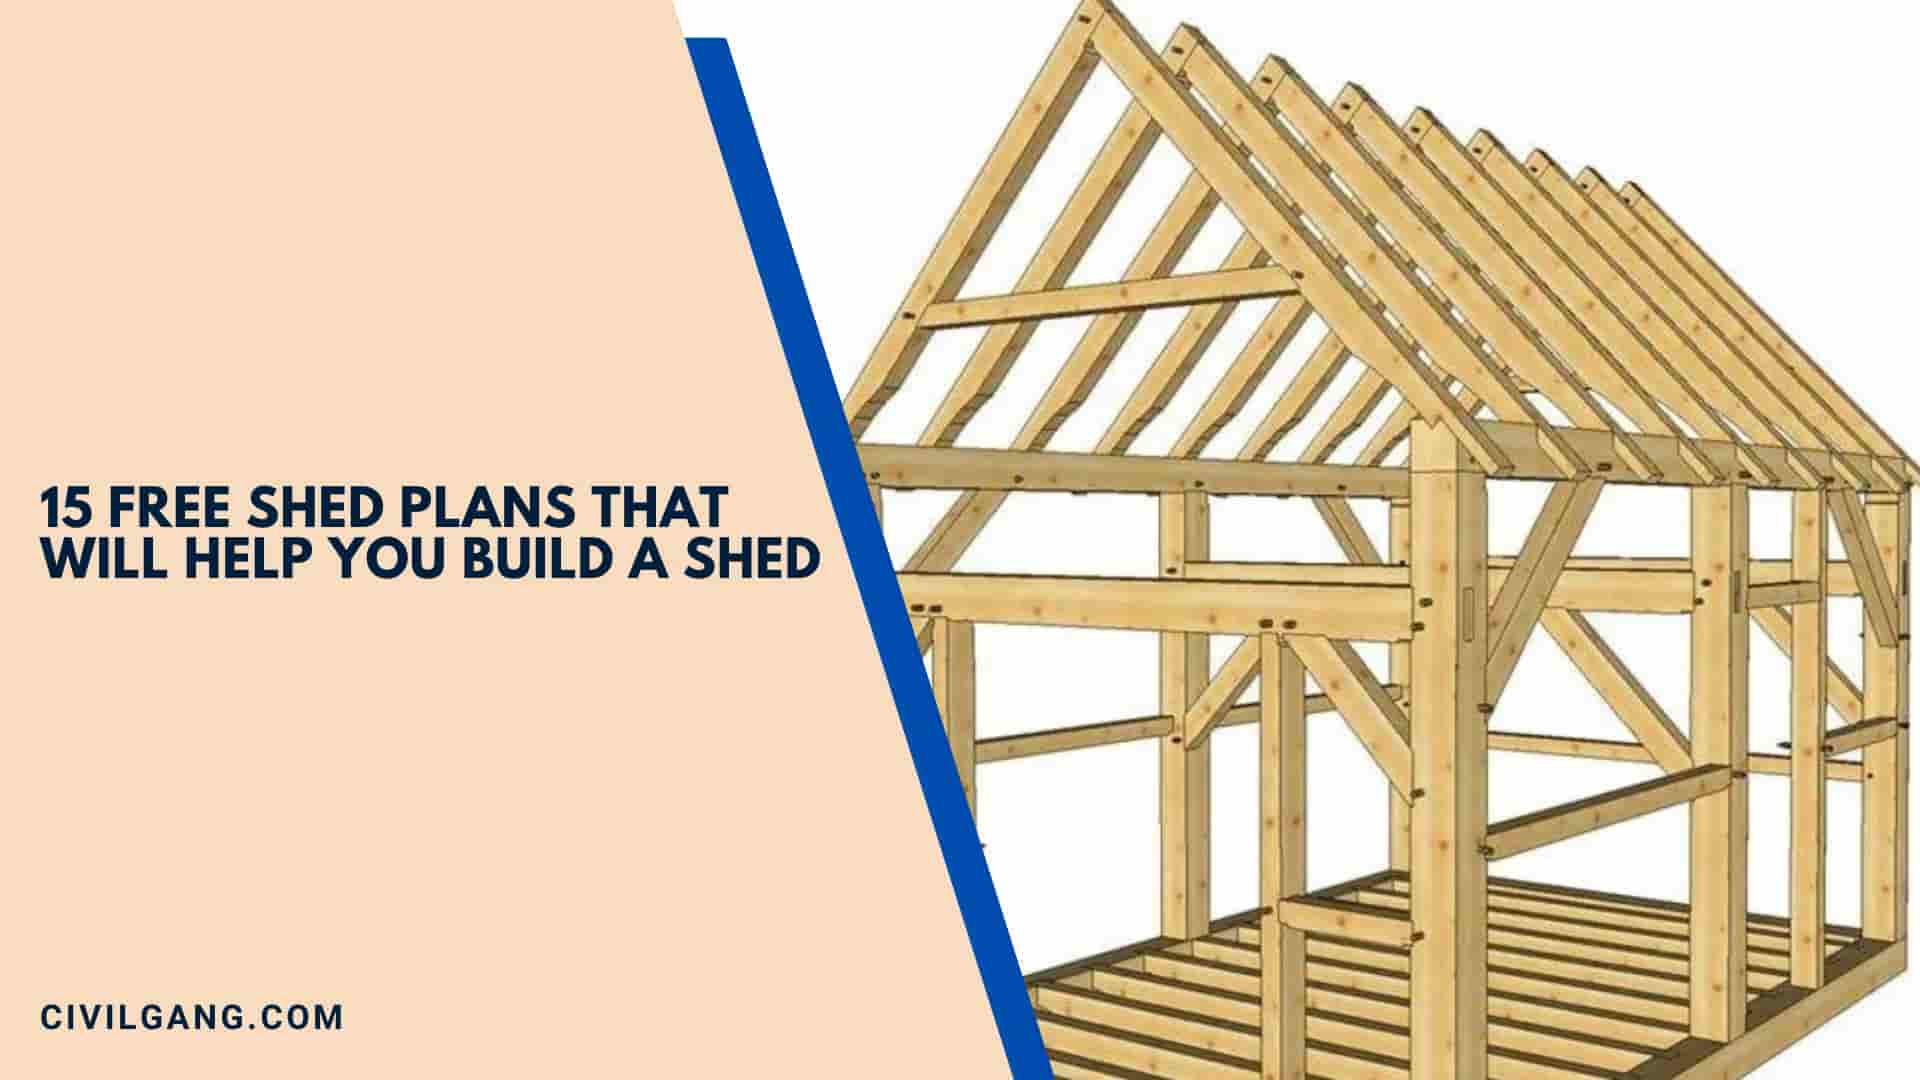 15 Free Shed Plans That Will Help You Build a Shed